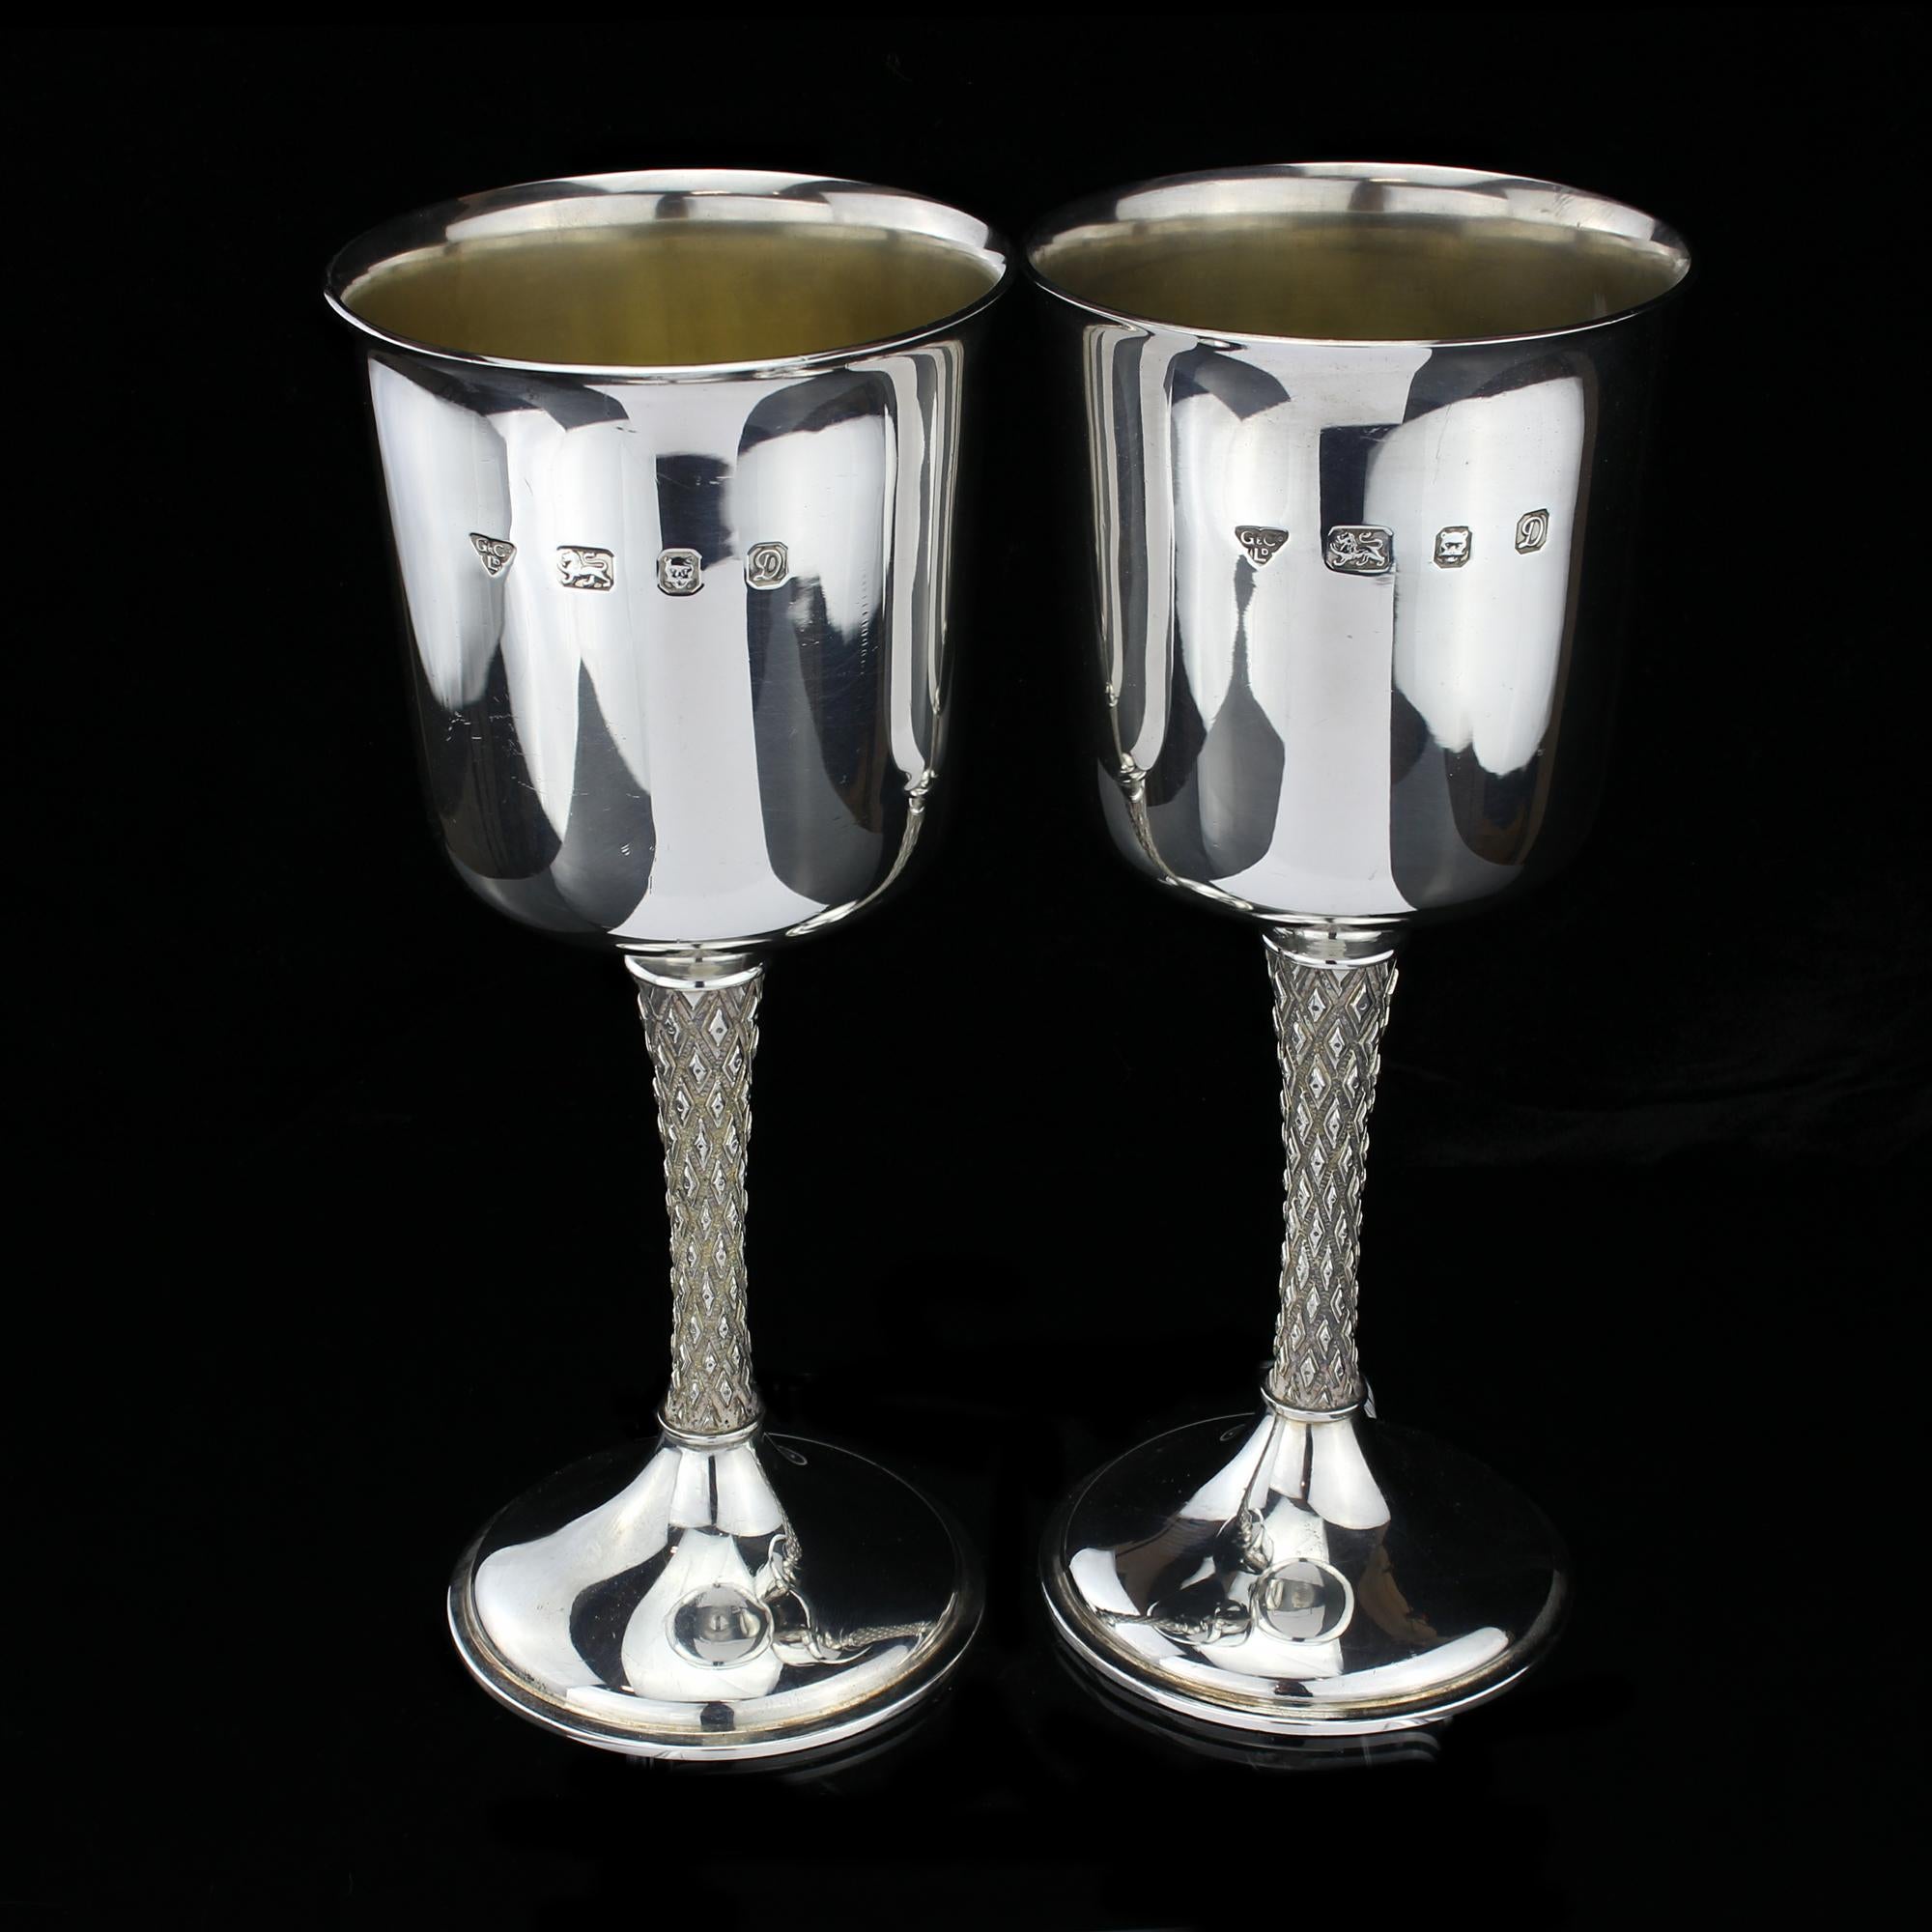 You’ve been looking for a set of goblets to match your silverware, but you can't find anything that's just right.

These vintage sterling silver goblets are the perfect addition to any table setting! They're made by Garrard & Co and designed by